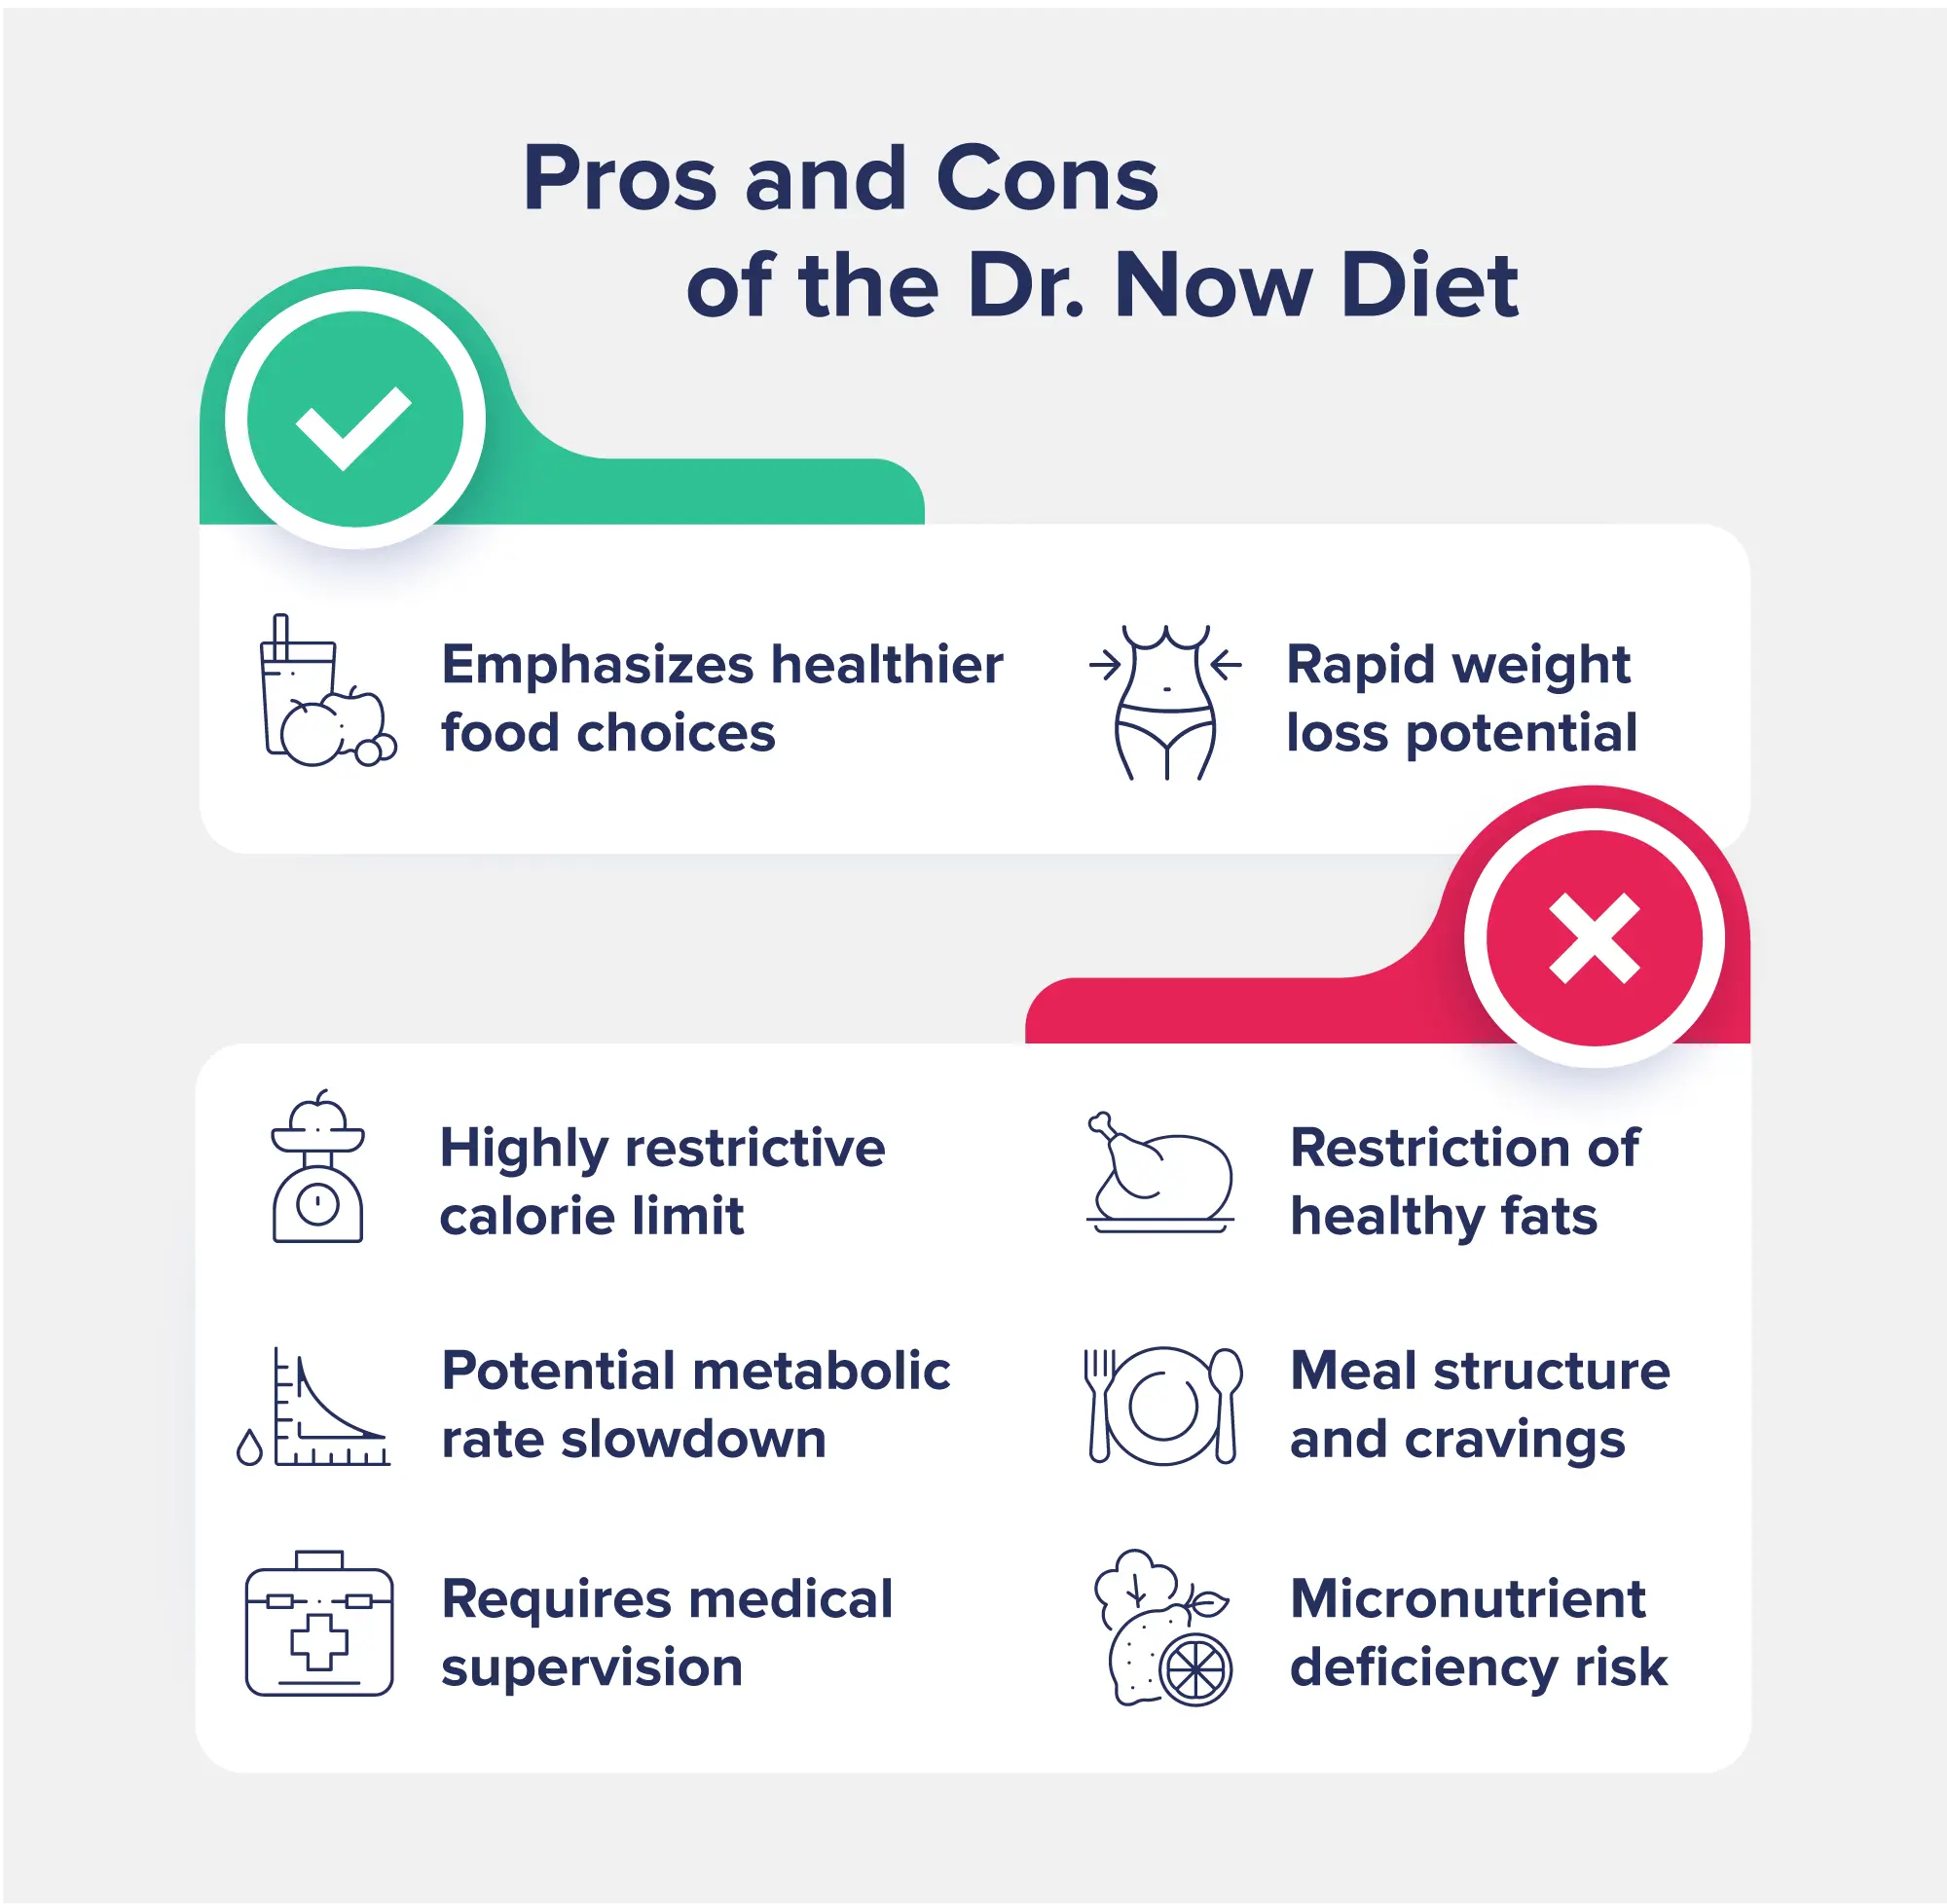 A graphic entitled "Pros and Cons of the Dr. Now Diet" with icons representing the pros (like rapid weight loss) and cons (like the highly restrictive calorie limit).